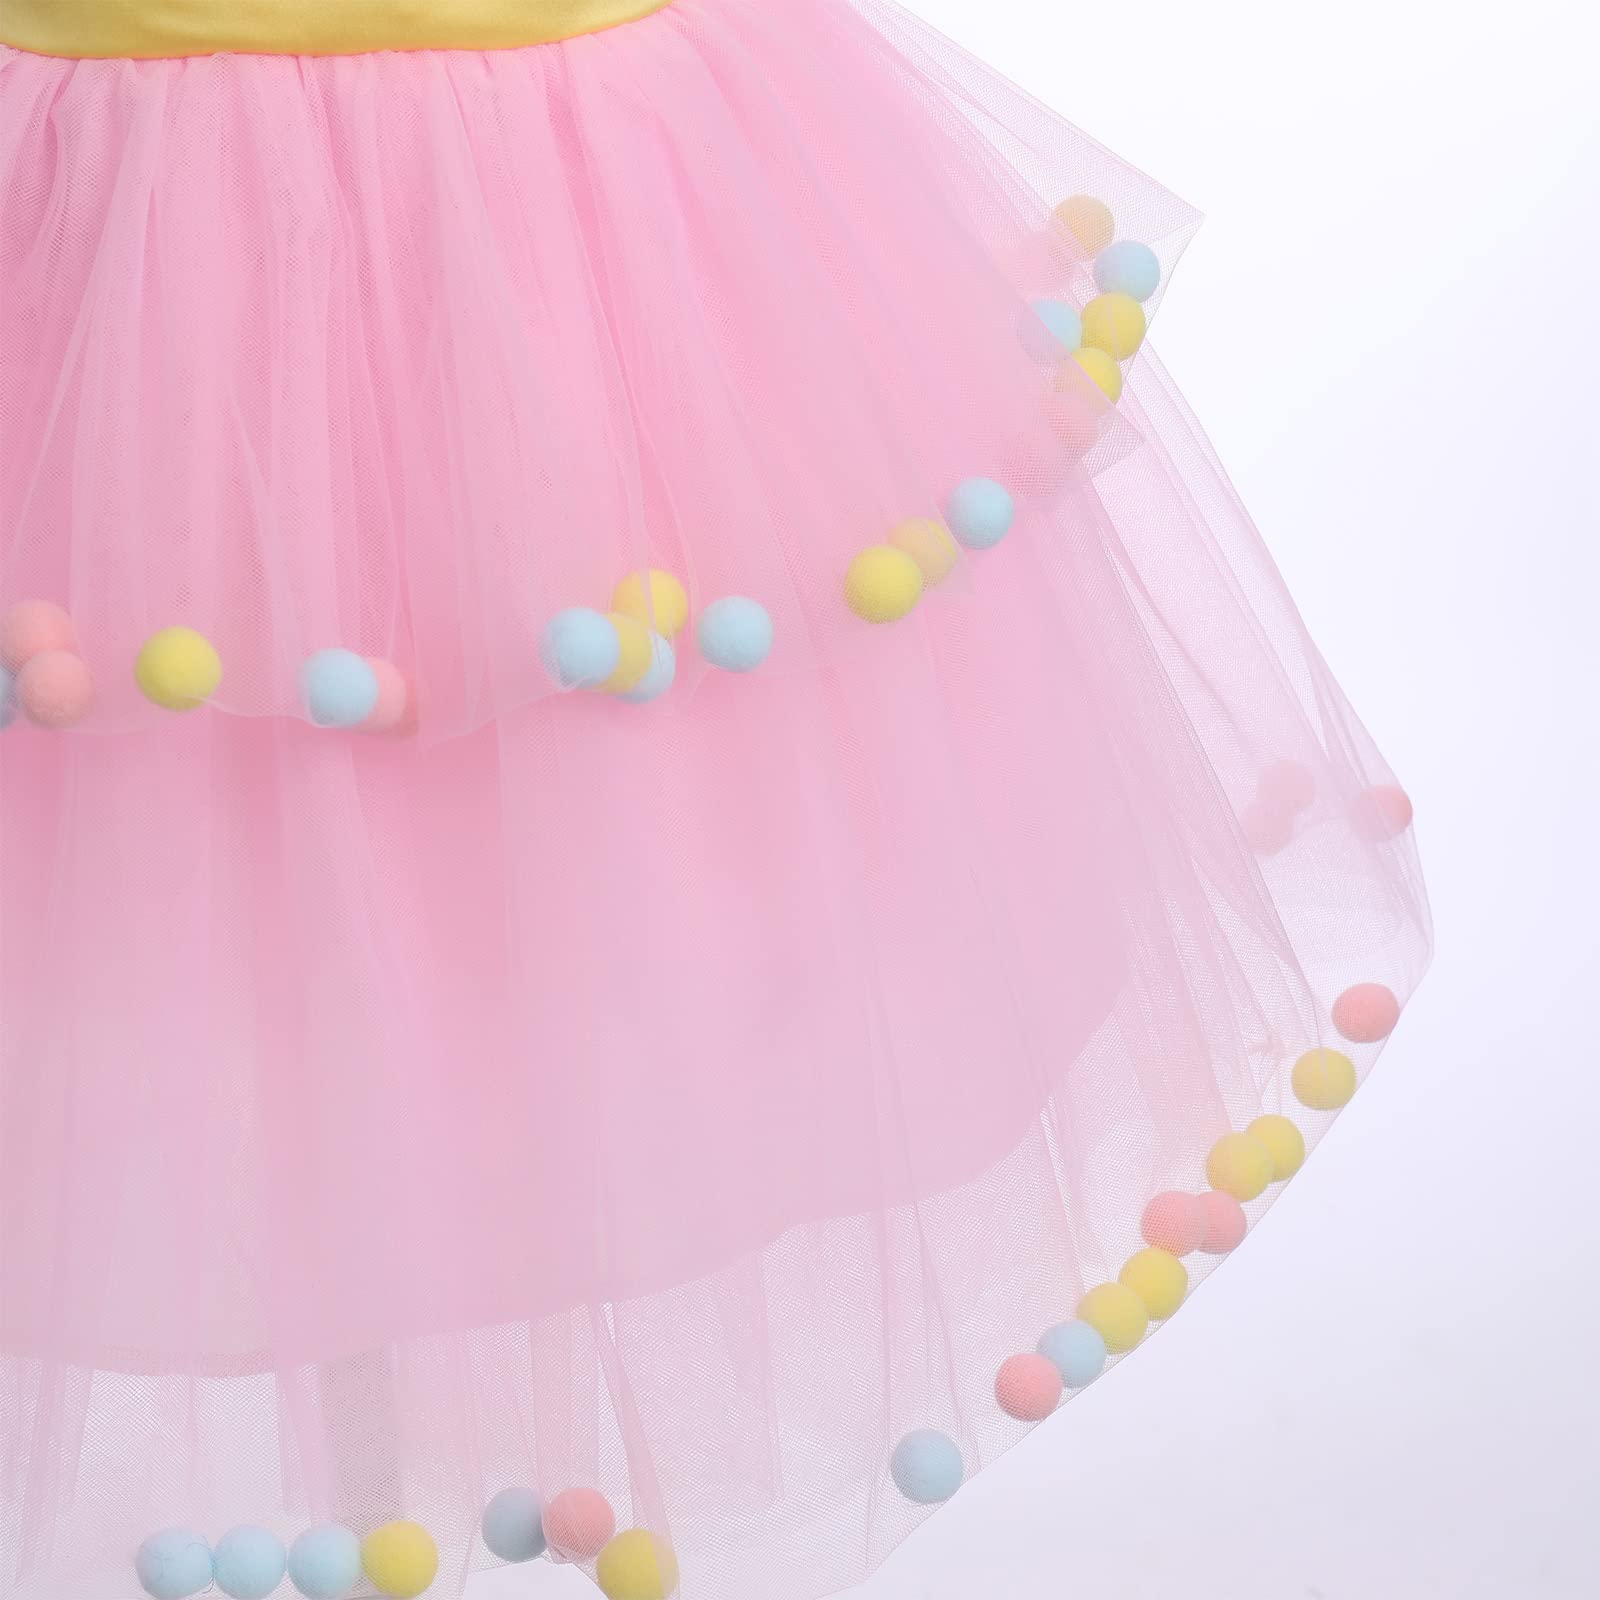 IDOPIP Carnival Circus Costume for Kids Baby Girls Romper Tutu Dress Princess Birthday Party Dress up with Headband Outfit